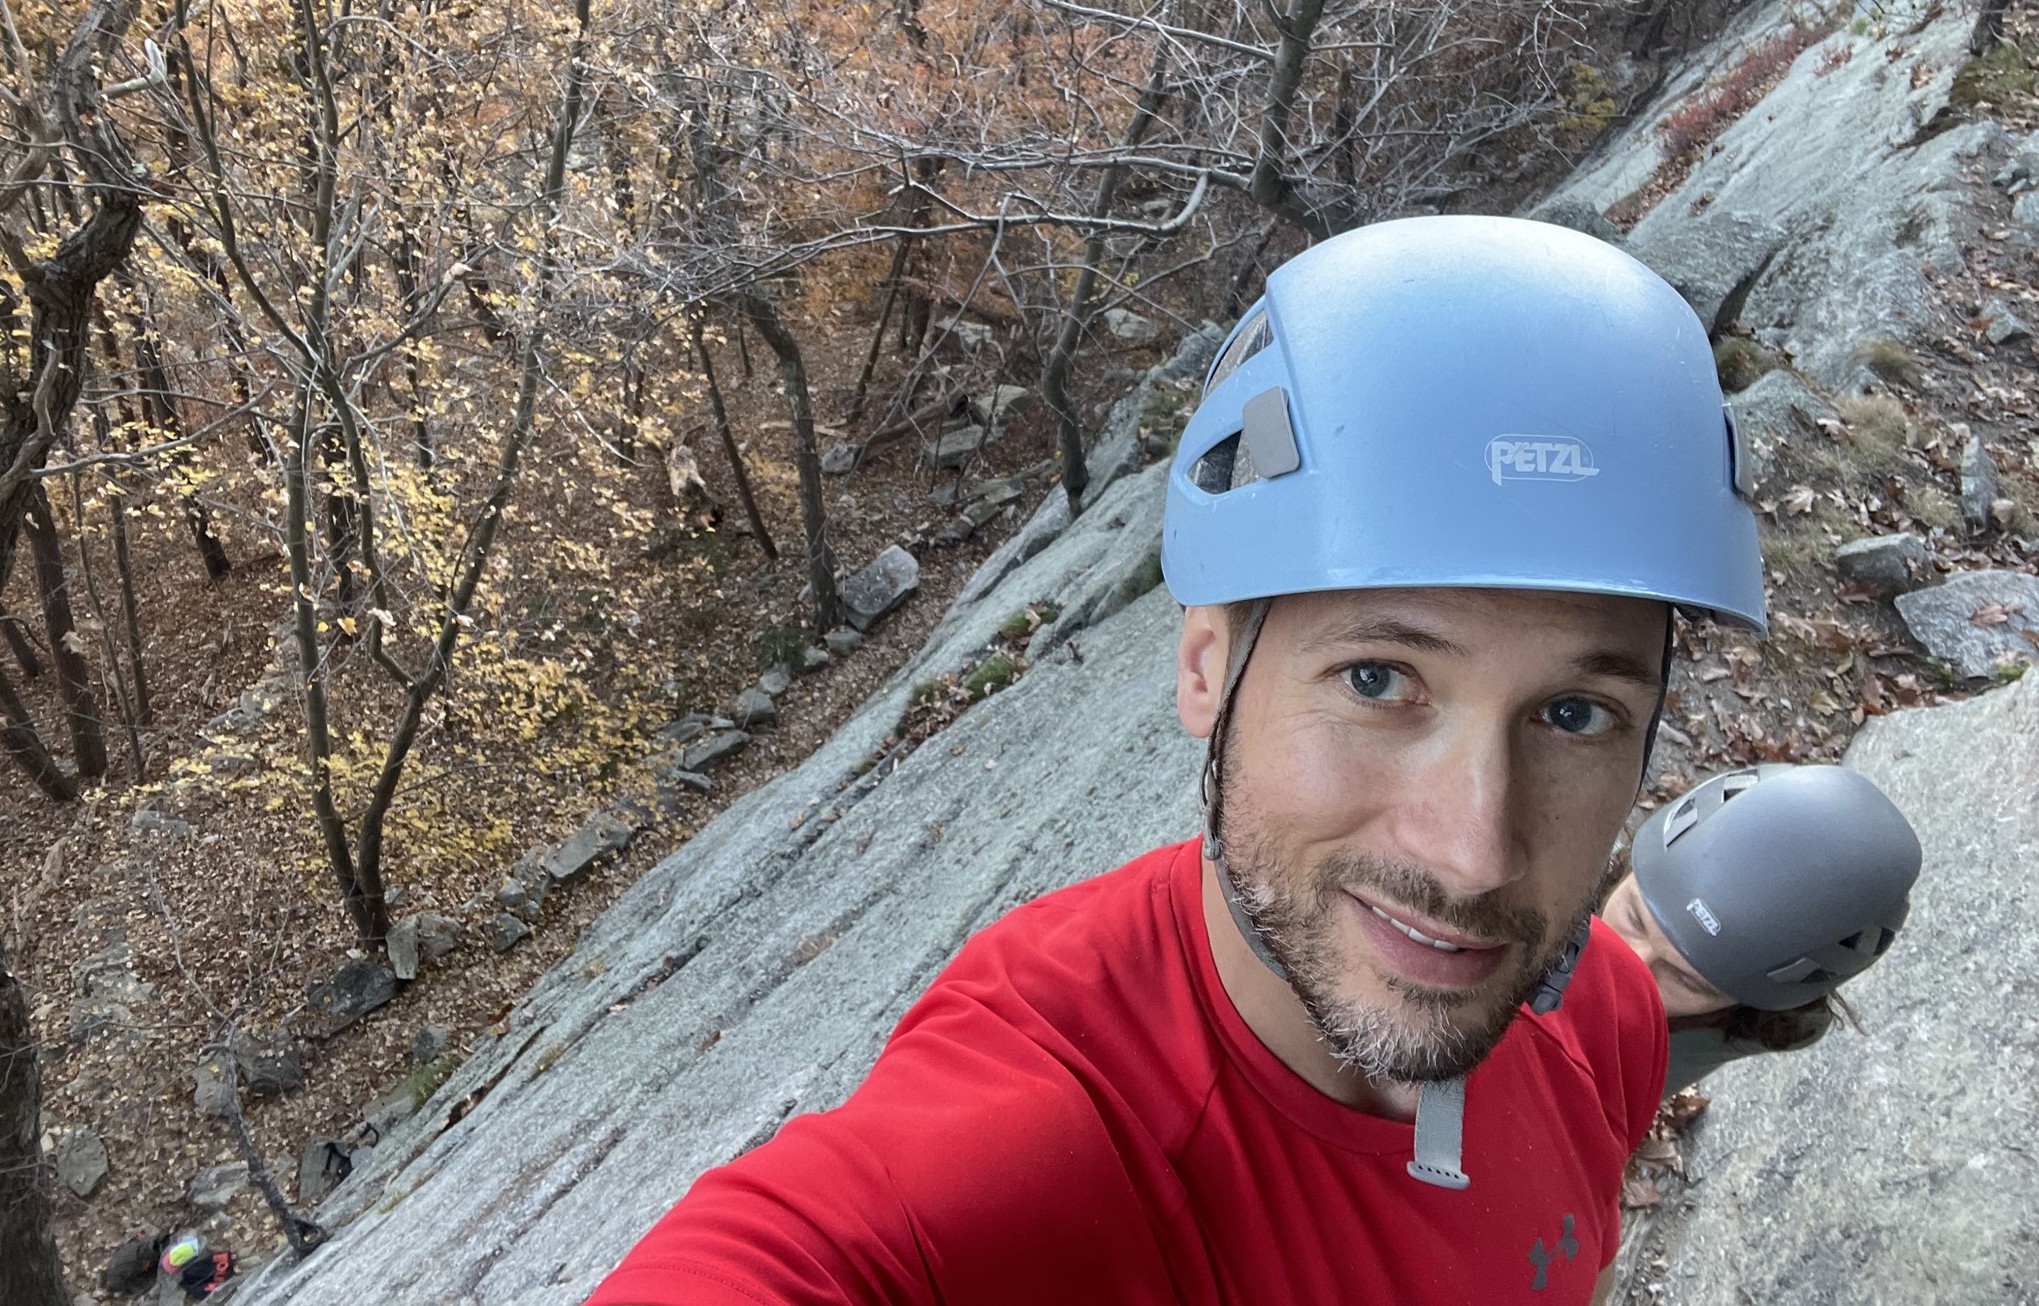 Selfie, smiling, wearing blue climbing helmet, standing on a rocky ledge with fall leaves and bare trees far below.